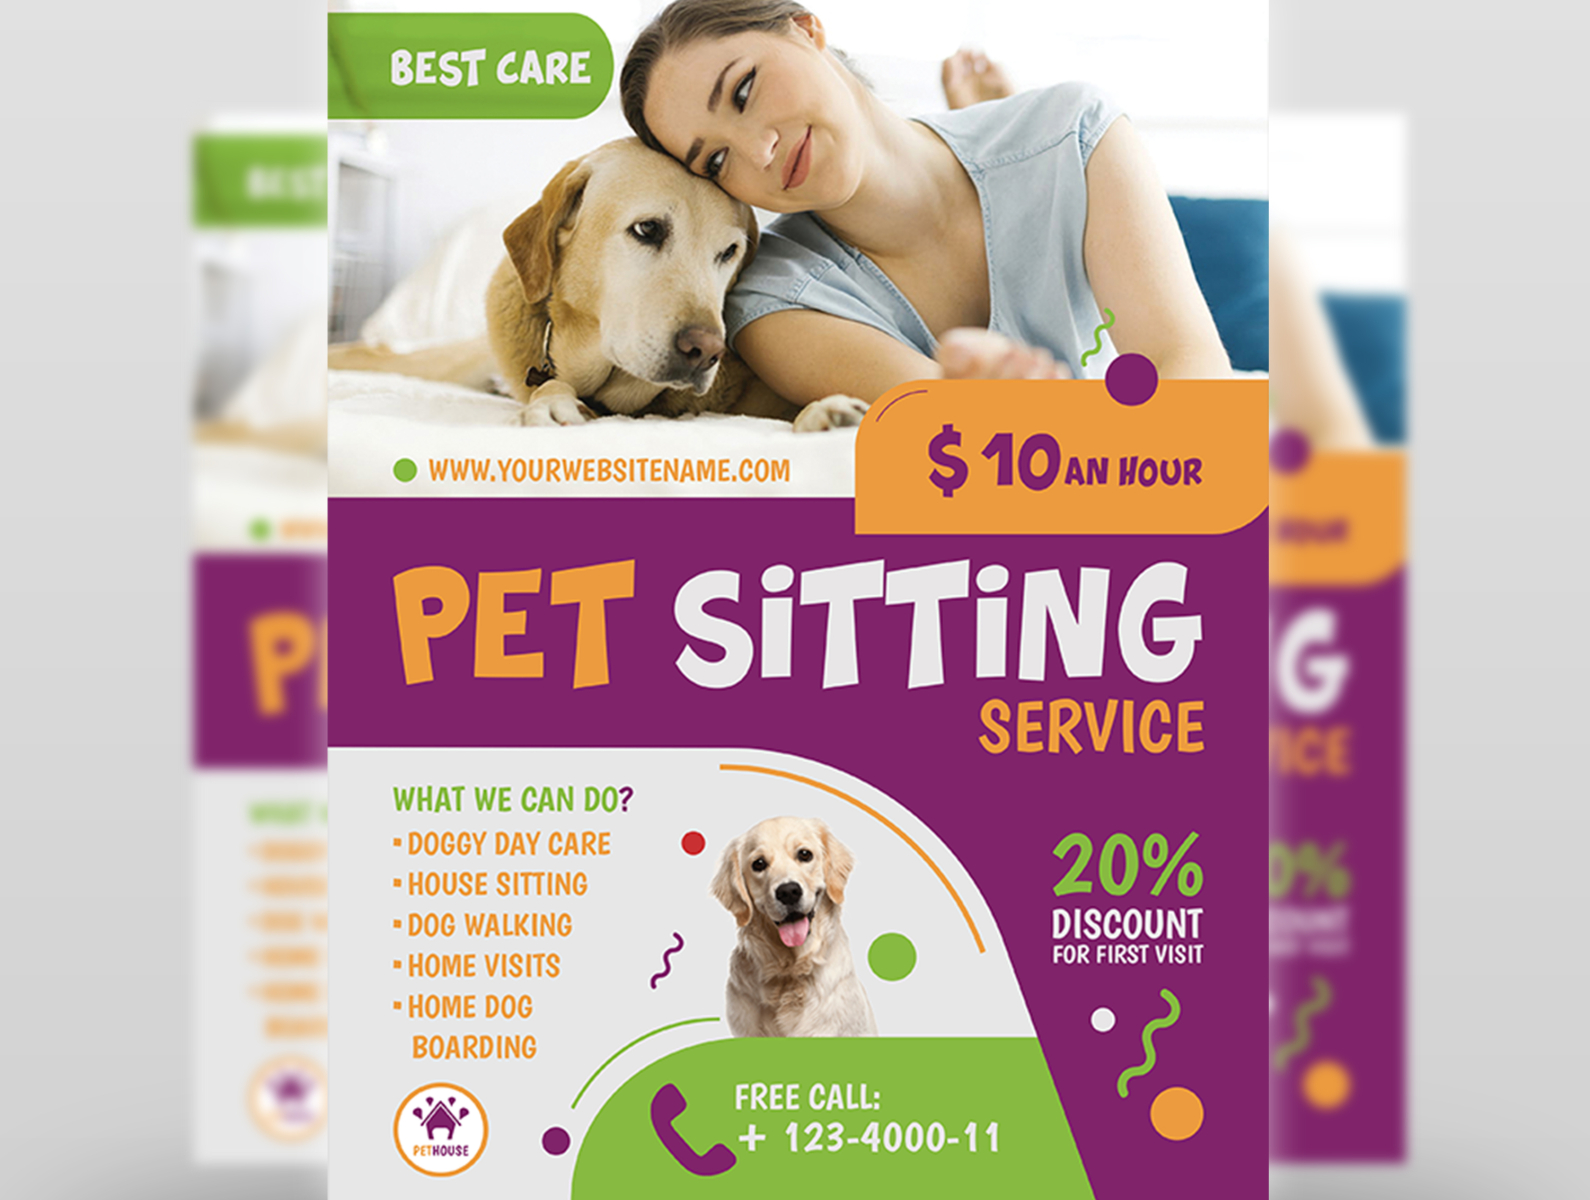 Pet Sitting Service Flyer Template by OWPictures on Dribbble Regarding Dog Grooming Flyers Template